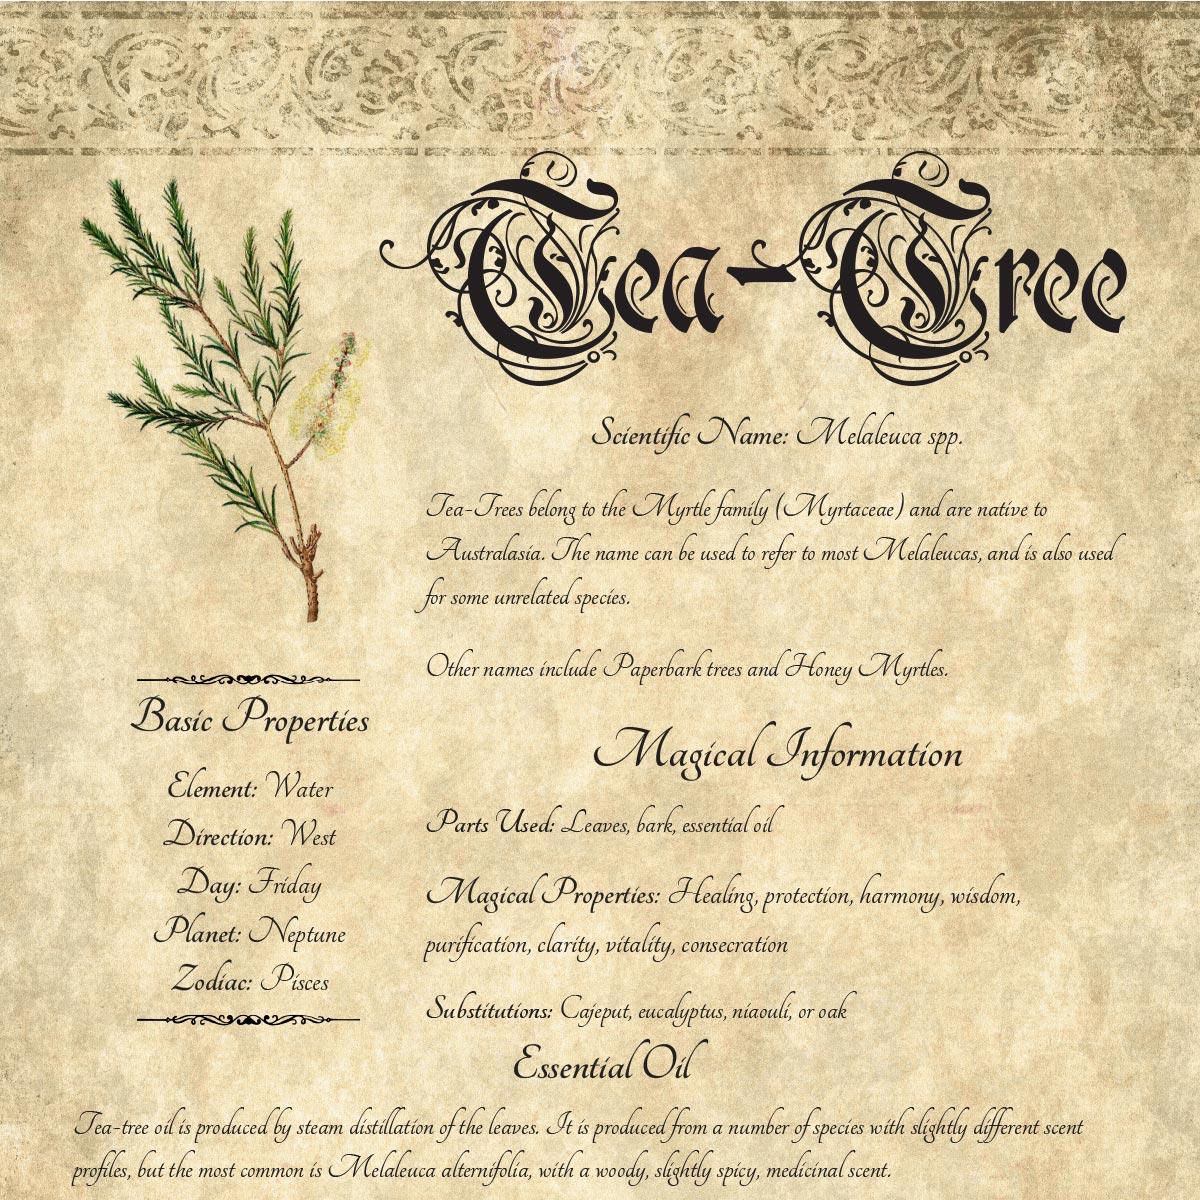 Antique-style grimoire page on the properties of Tea-Tree, with an aged paper background and script font